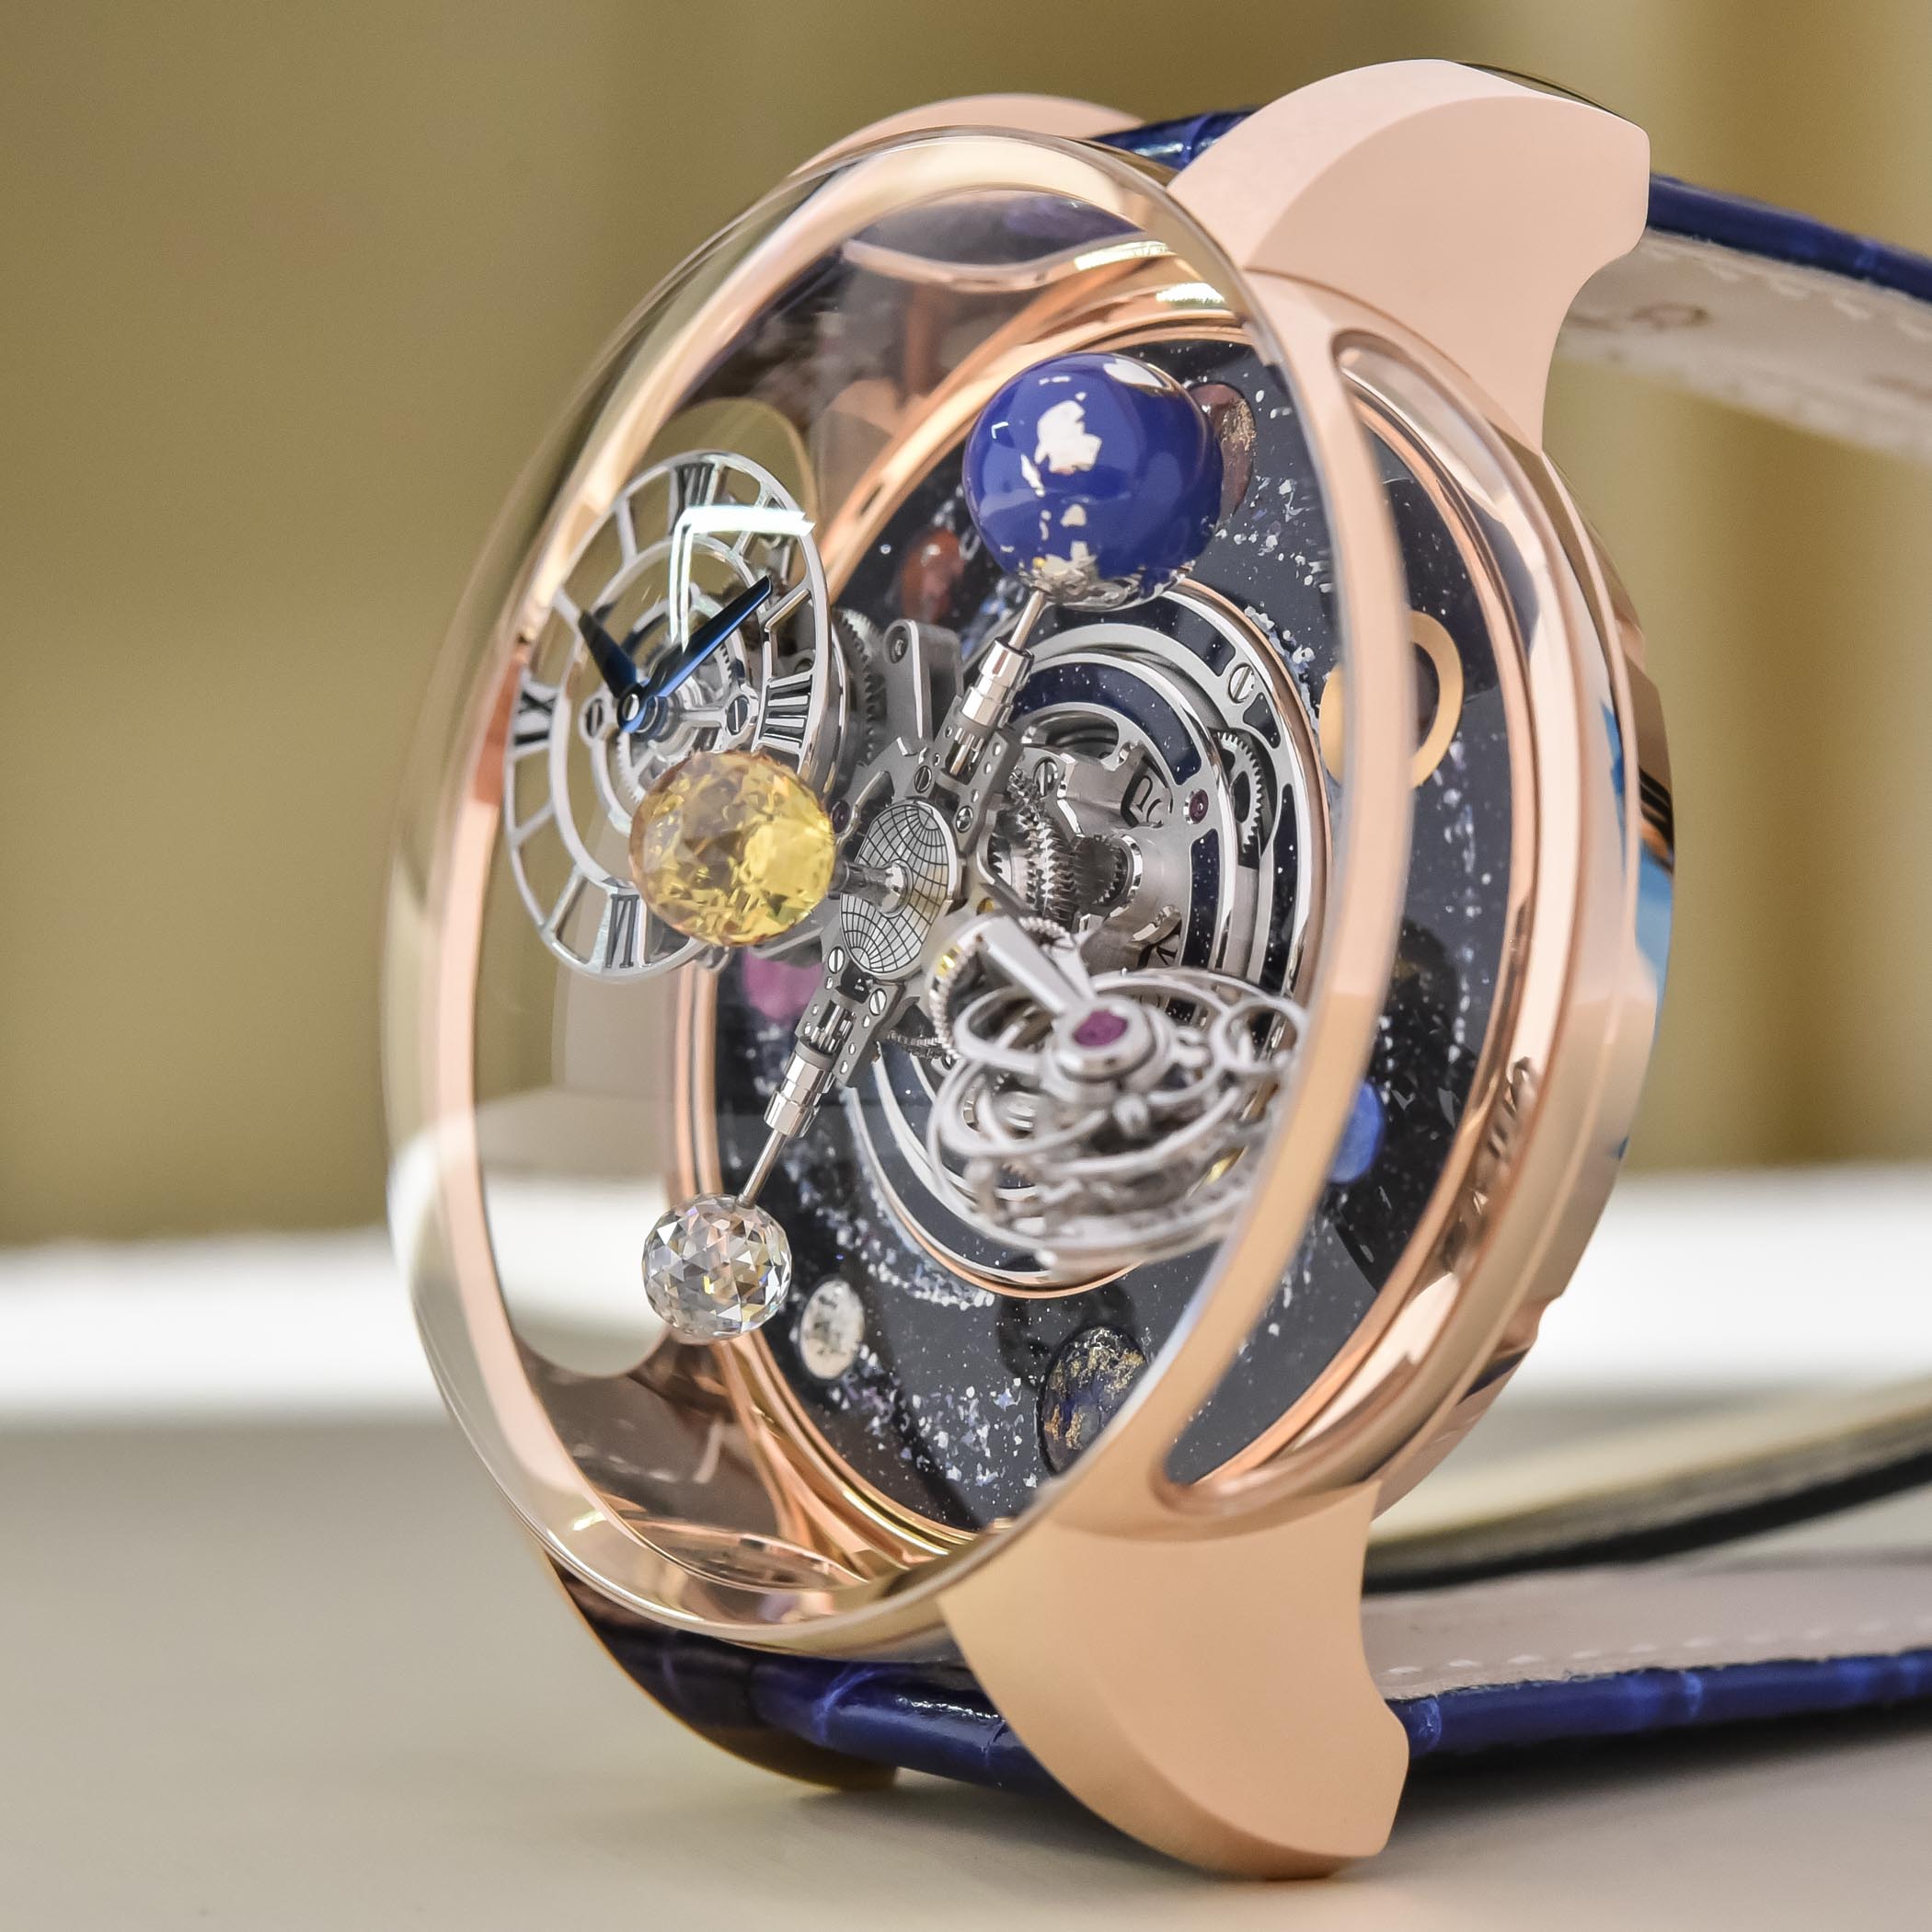 The Mind-Bogglingly Complex and Demonstrative Jacob  Co. Astronomia  Tourbillon Typhoon - Monochrome Watches